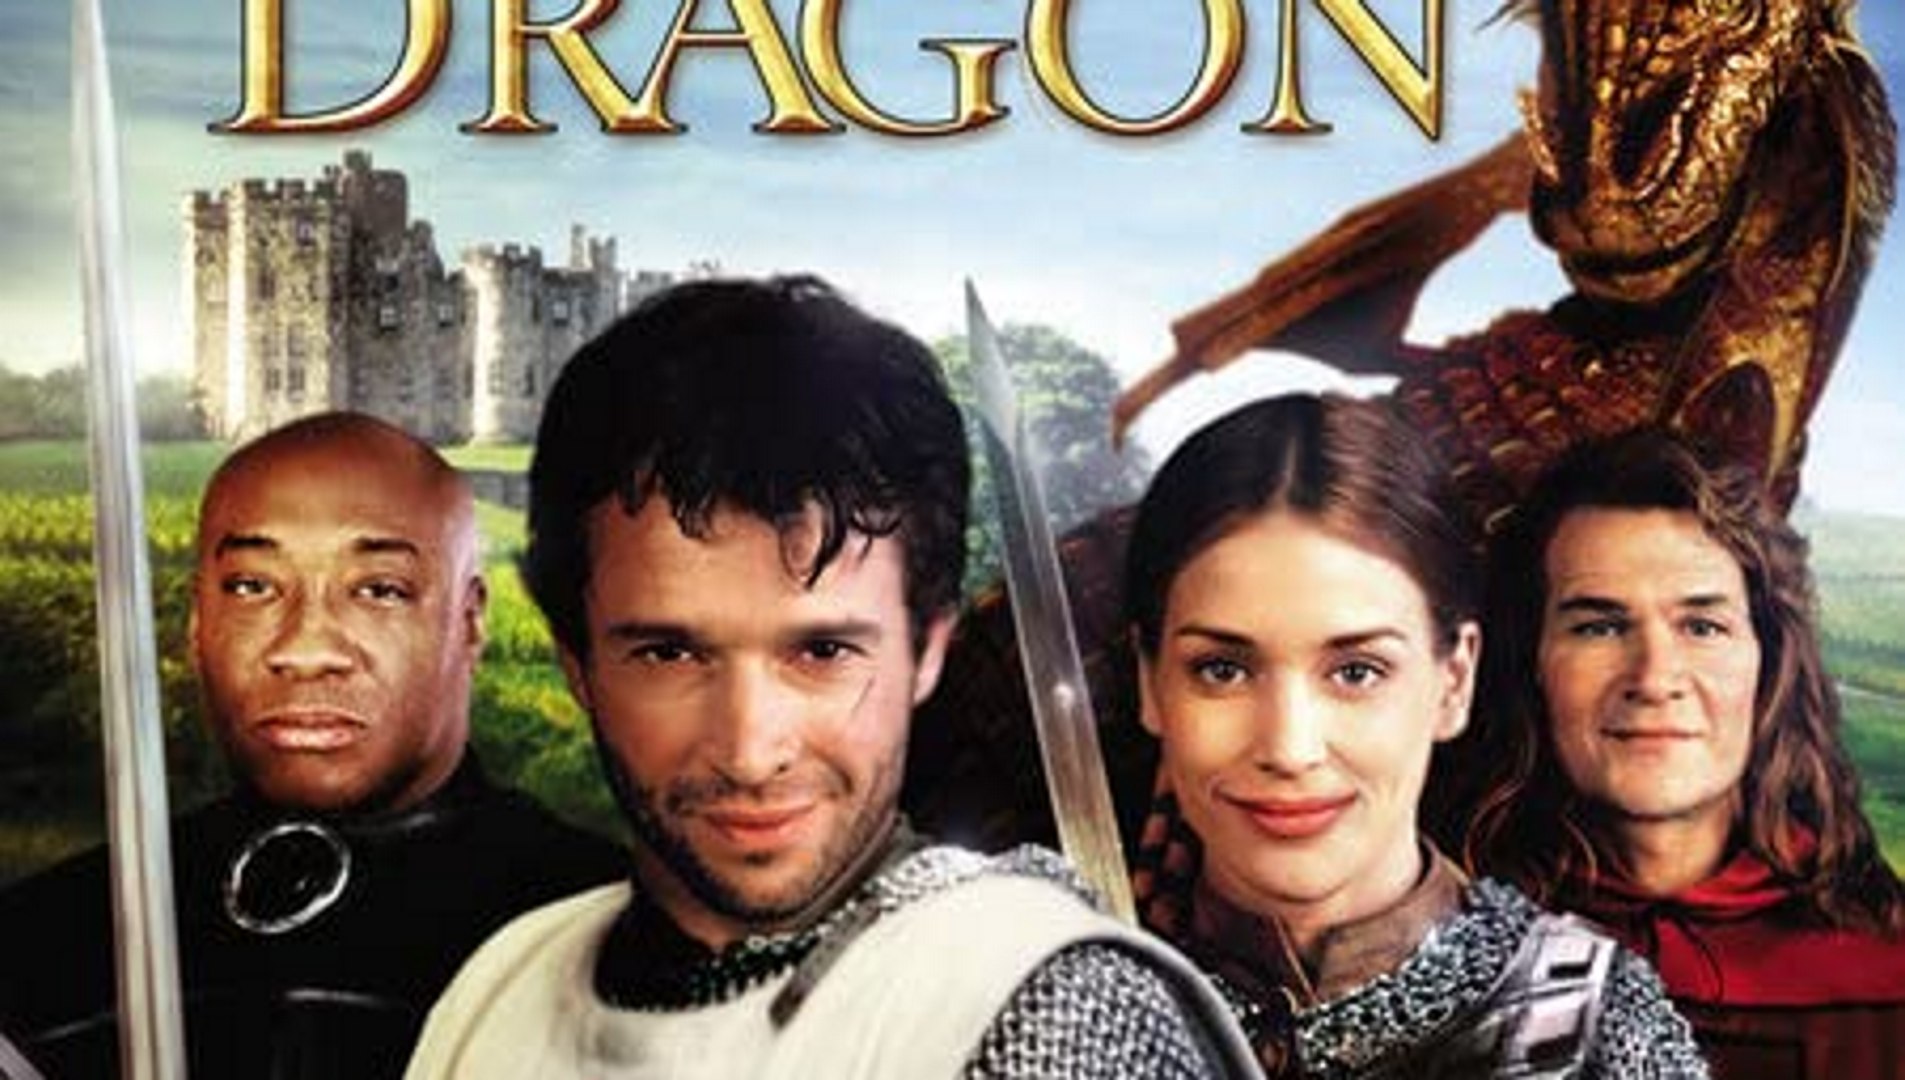 George and the Dragon Movie (2004) - James Purefoy, Patrick Swayze, Piper  Perabo, Michael Clarke Duncan - video Dailymotion